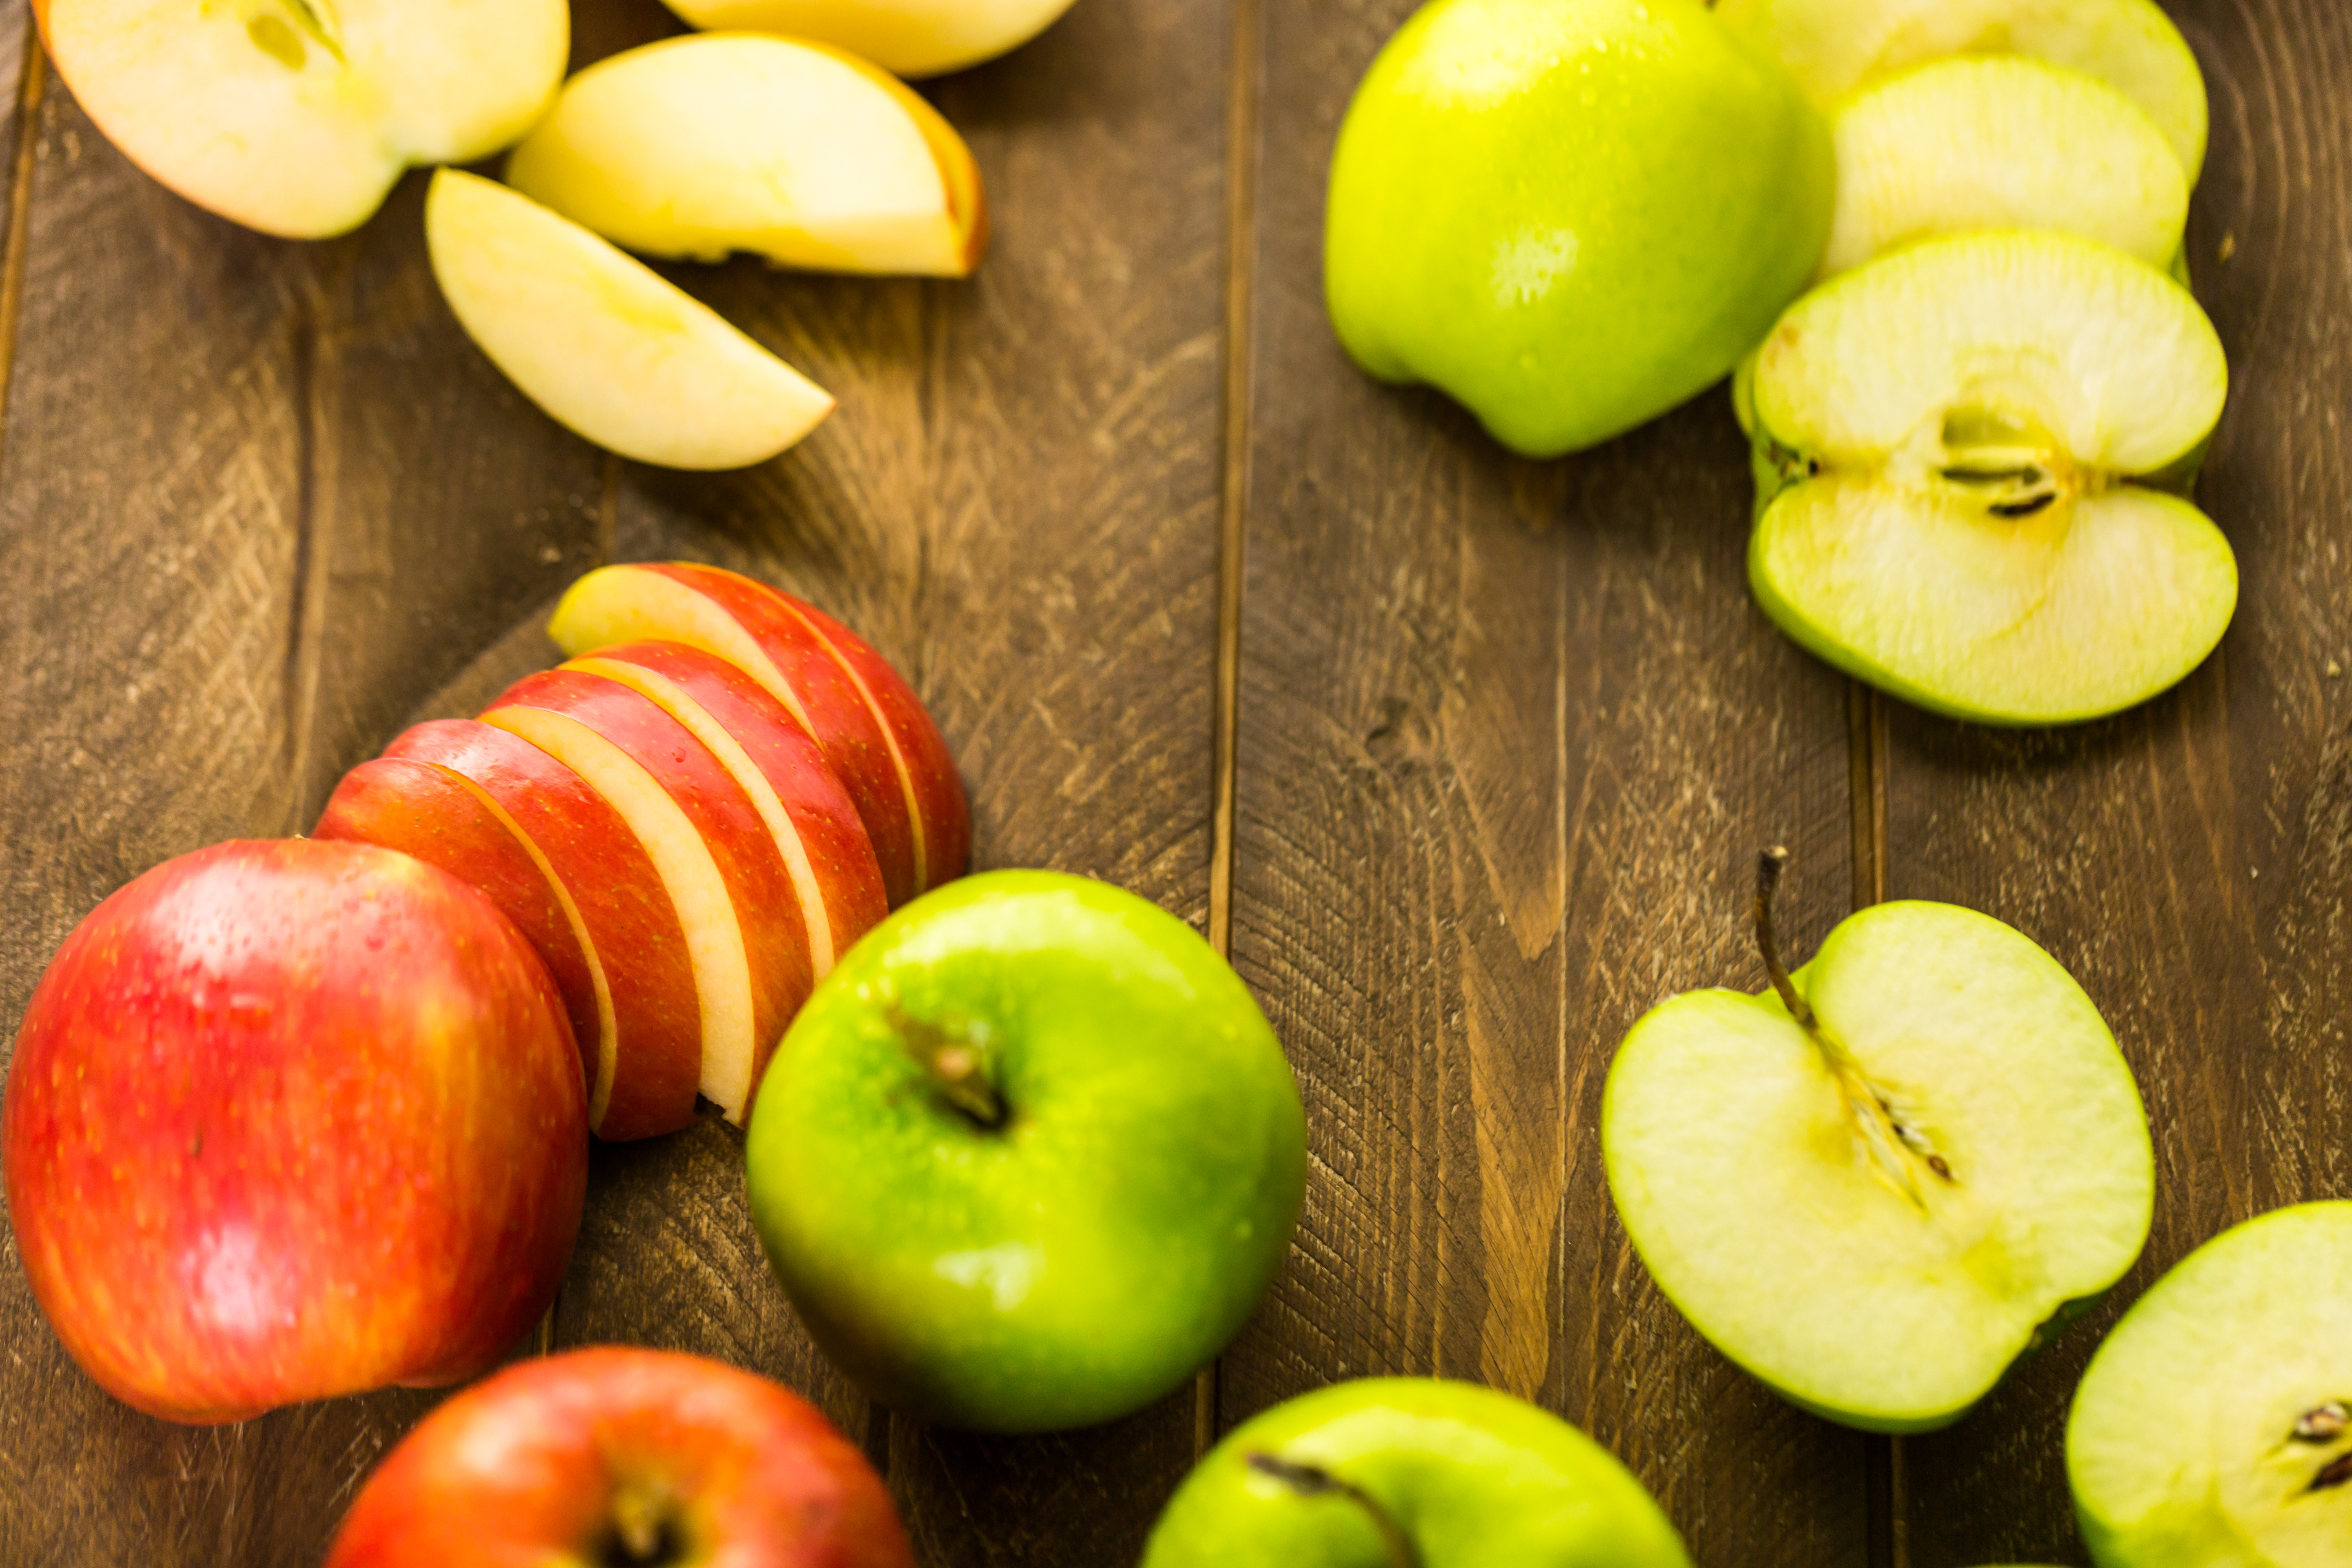 Apple Taste Test and Interesting Facts - OrganWise Guys Blog